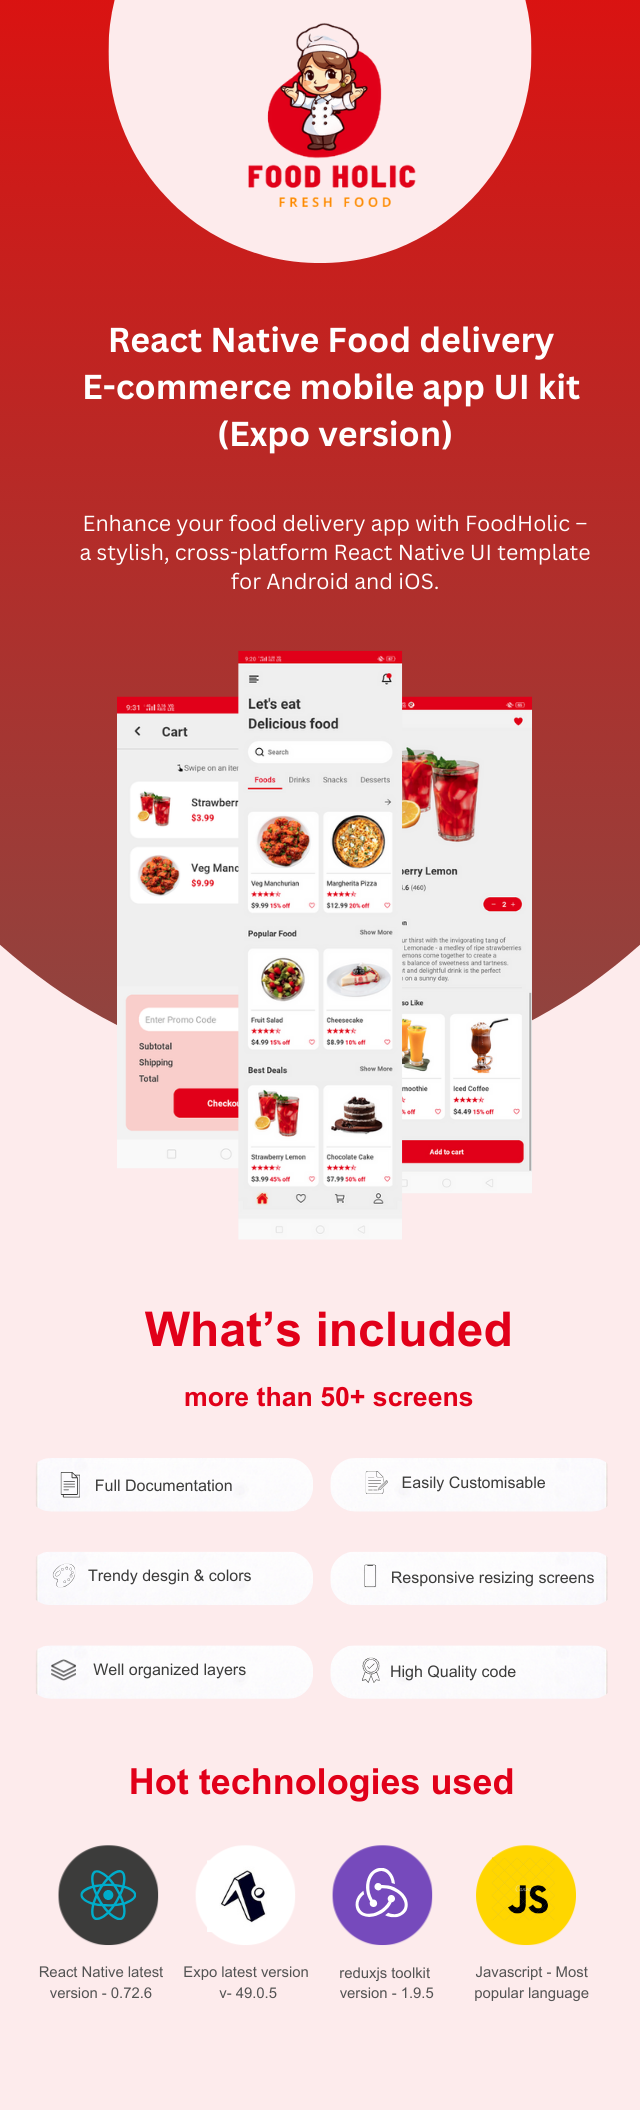 FoodHolic: -React native Mobile food delivery app ui kit featured images